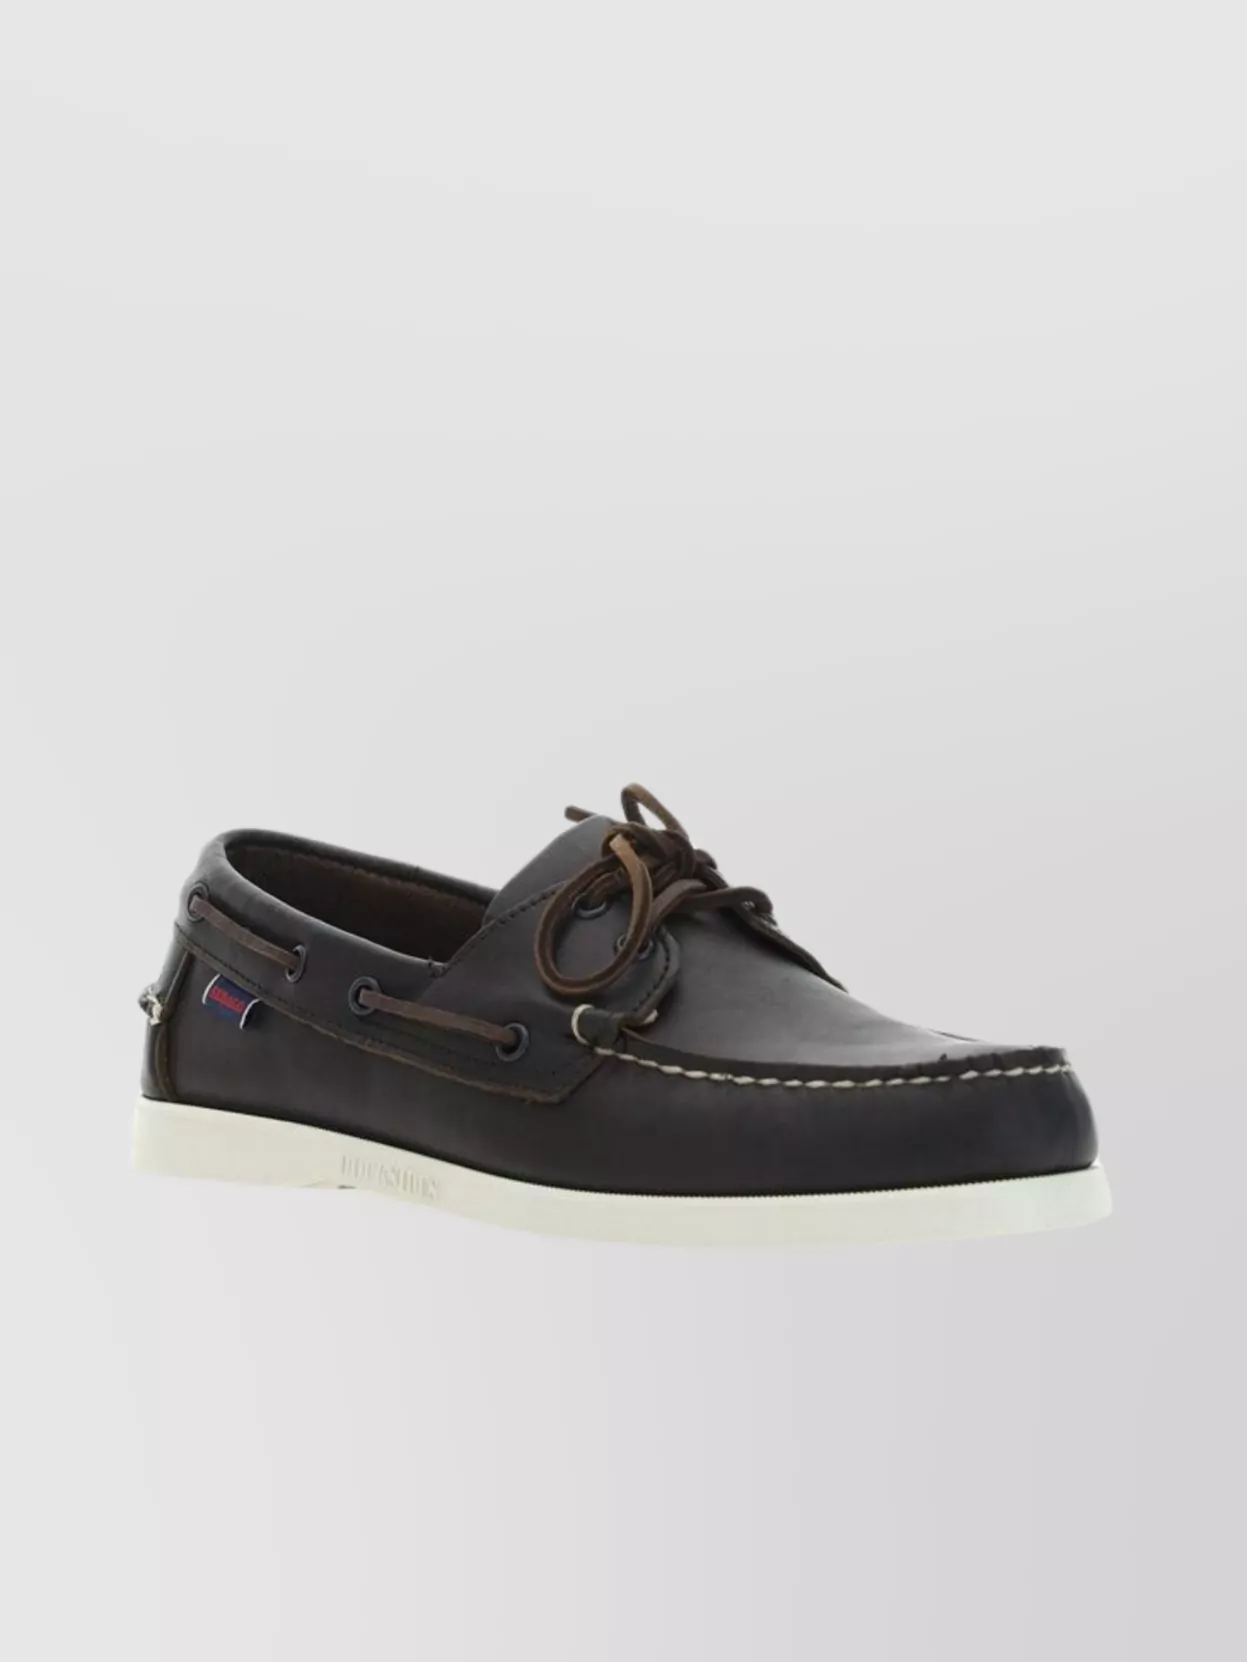 Shop Sebago Docksides With Contrast Sole And Stitch Detailing